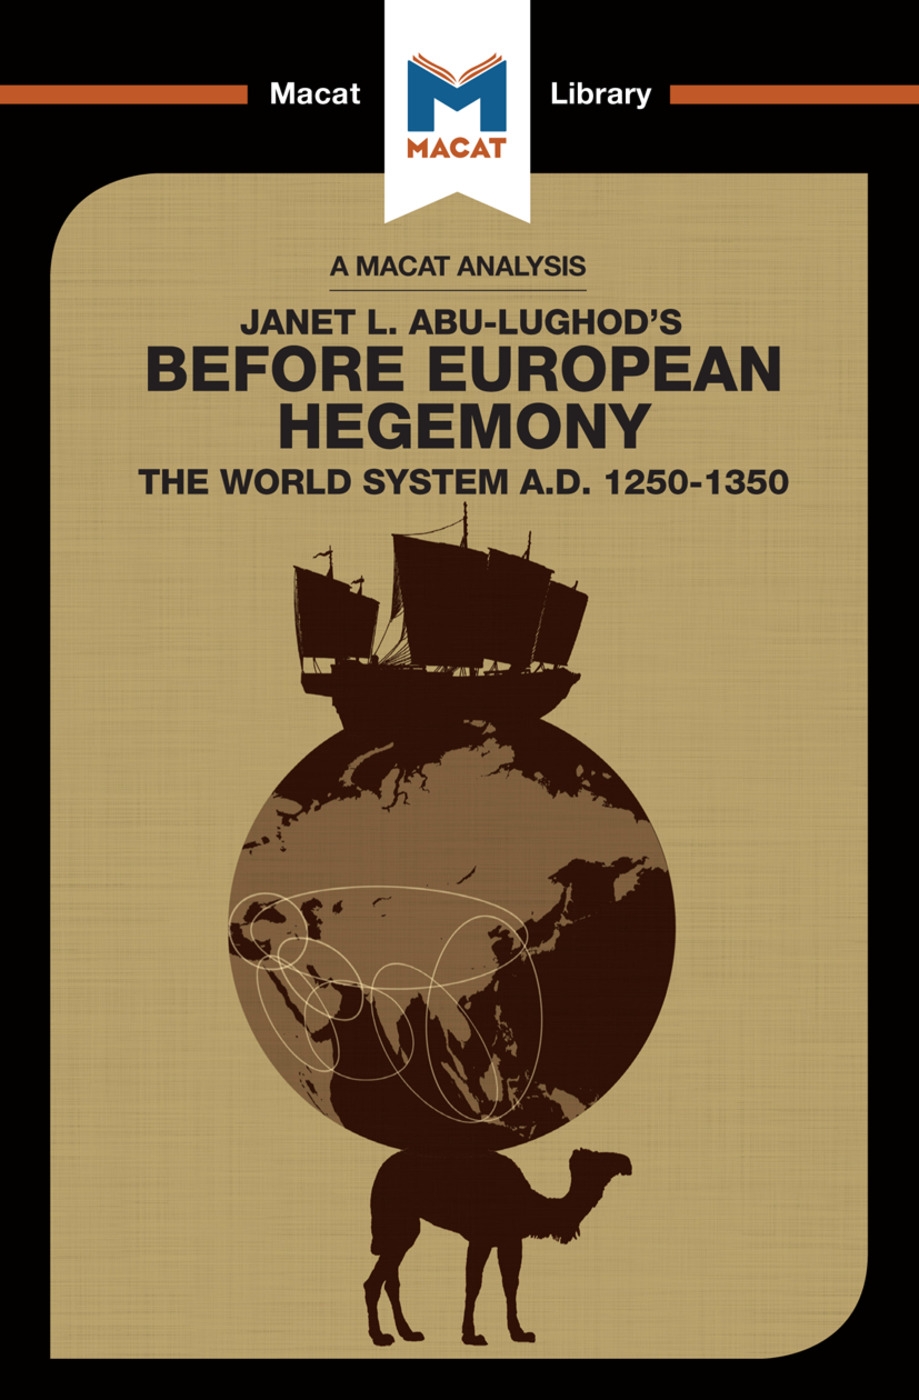 Before European Hegemony: The World System A.D. 1250 - 1350